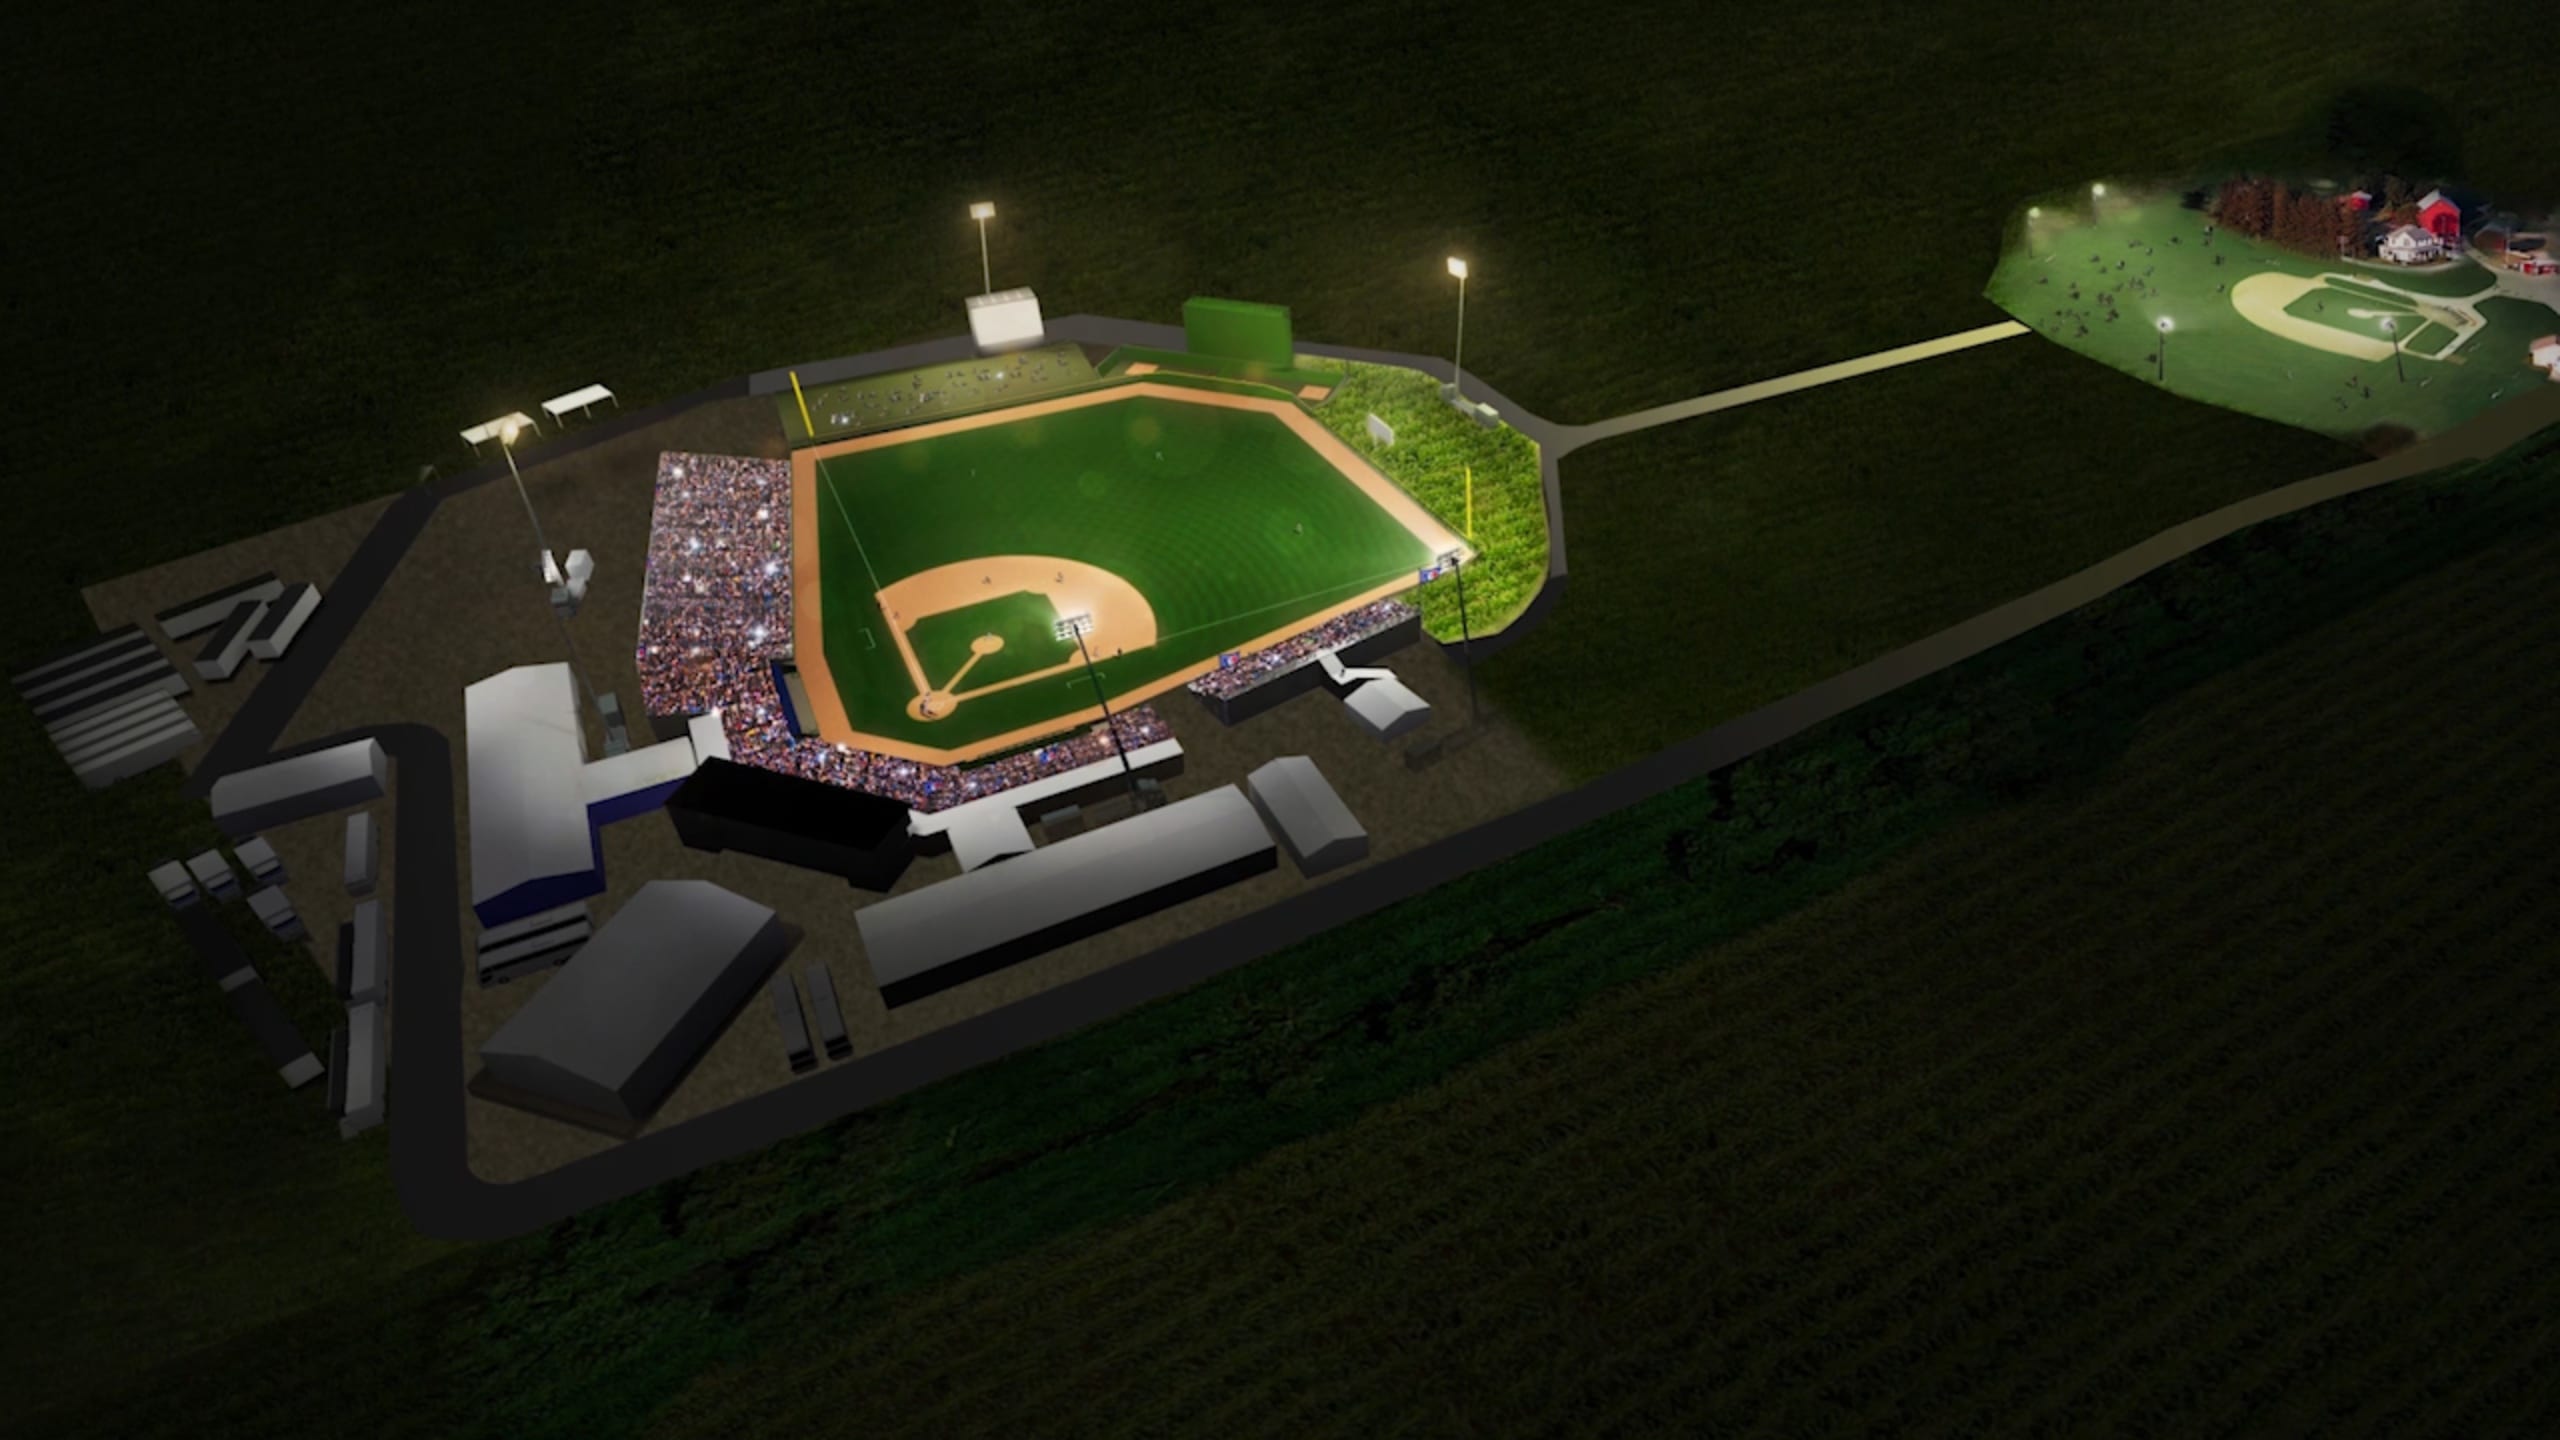 White Sox, Yankees to play at 'Field of Dreams' in 2020